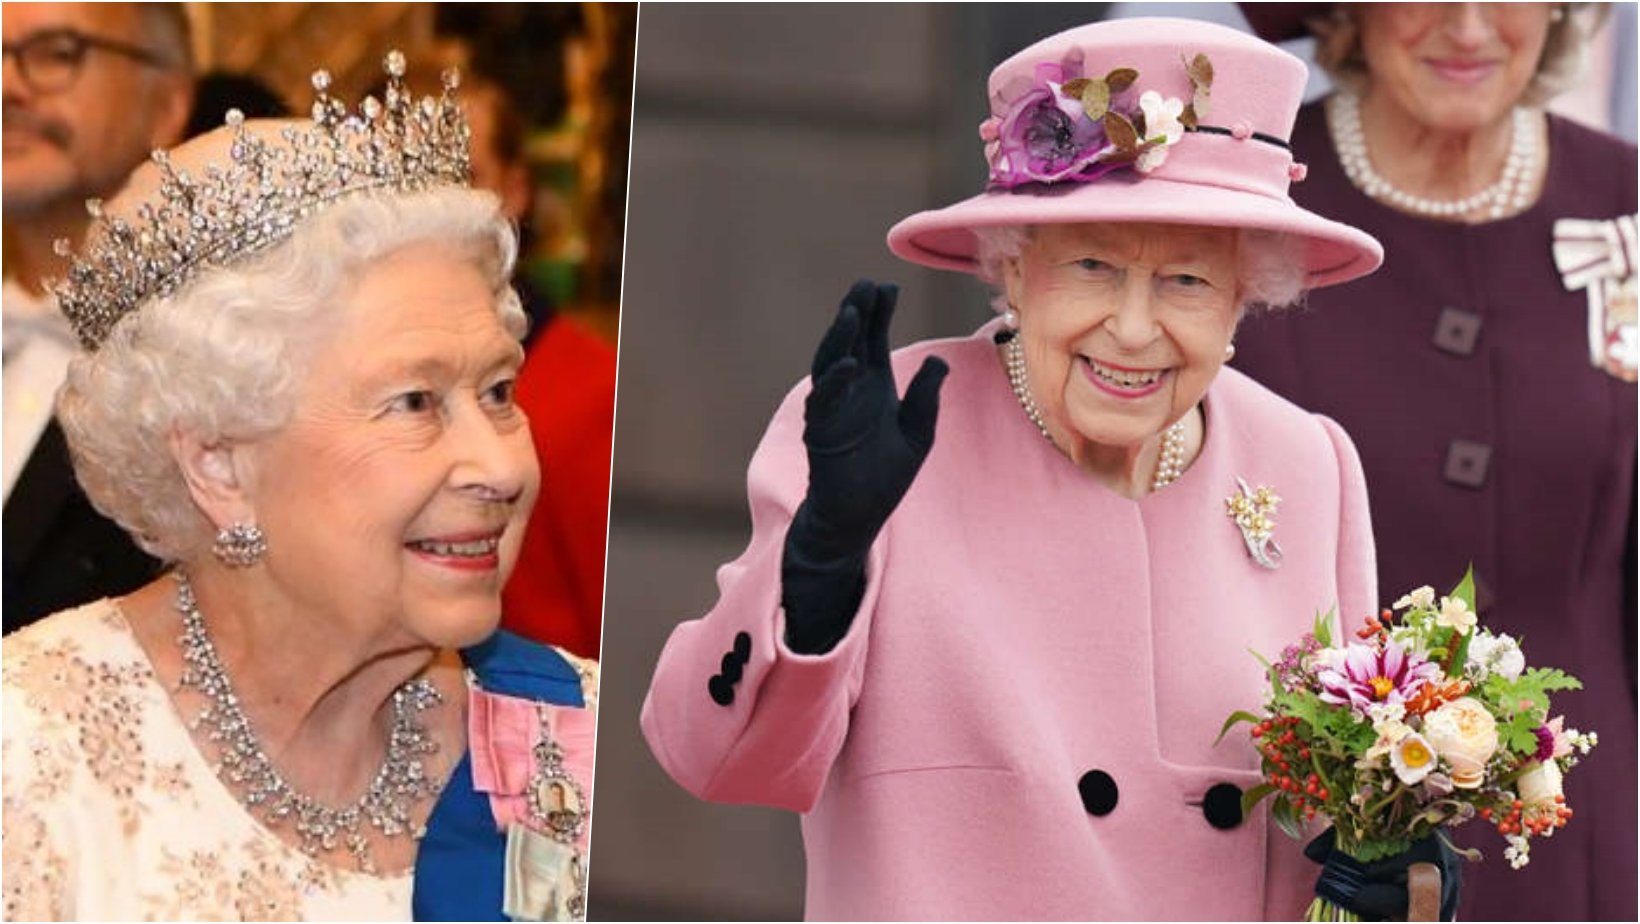 6 facebook cover 23.jpg?resize=412,232 - Queen Elizabeth Politely Declines “Oldie Of The Year” Award Saying She Does Not Fit The Criteria